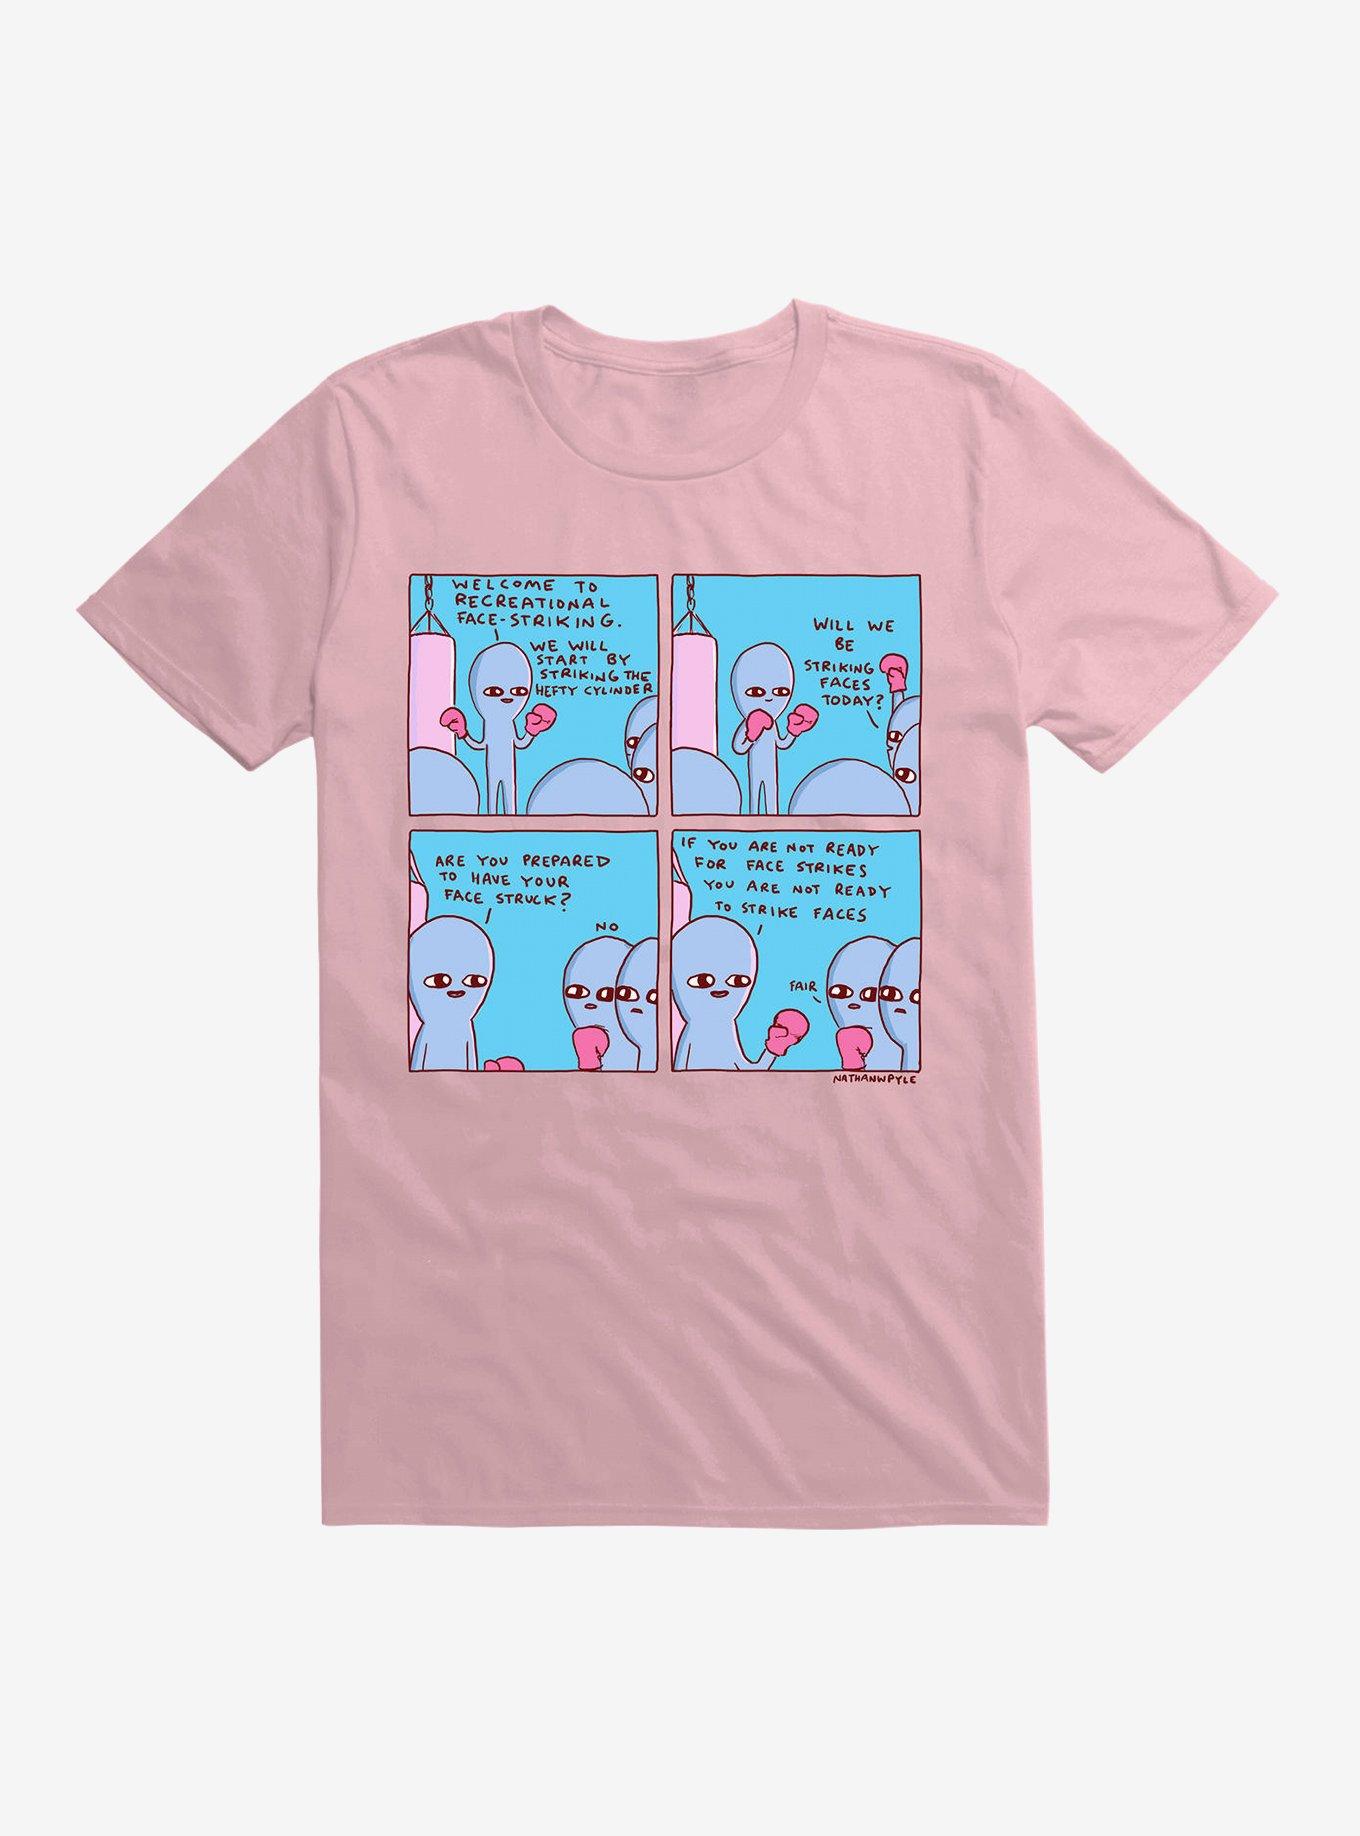 Strange Planet Will We Be Striking Faces Today? T-Shirt, LIGHT PINK, hi-res